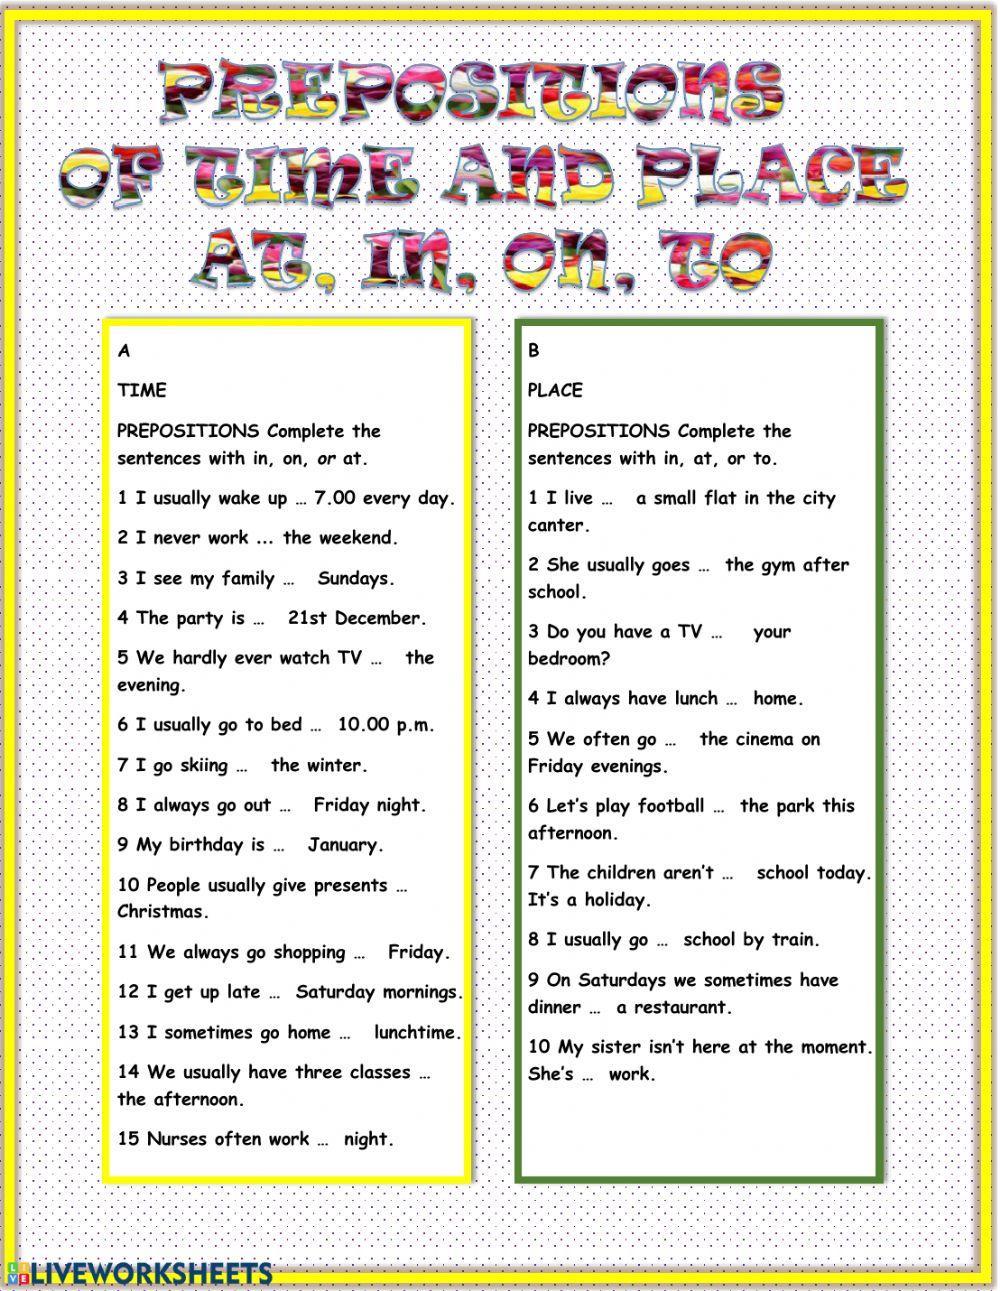 Prepositions of time and place at, in, on, to